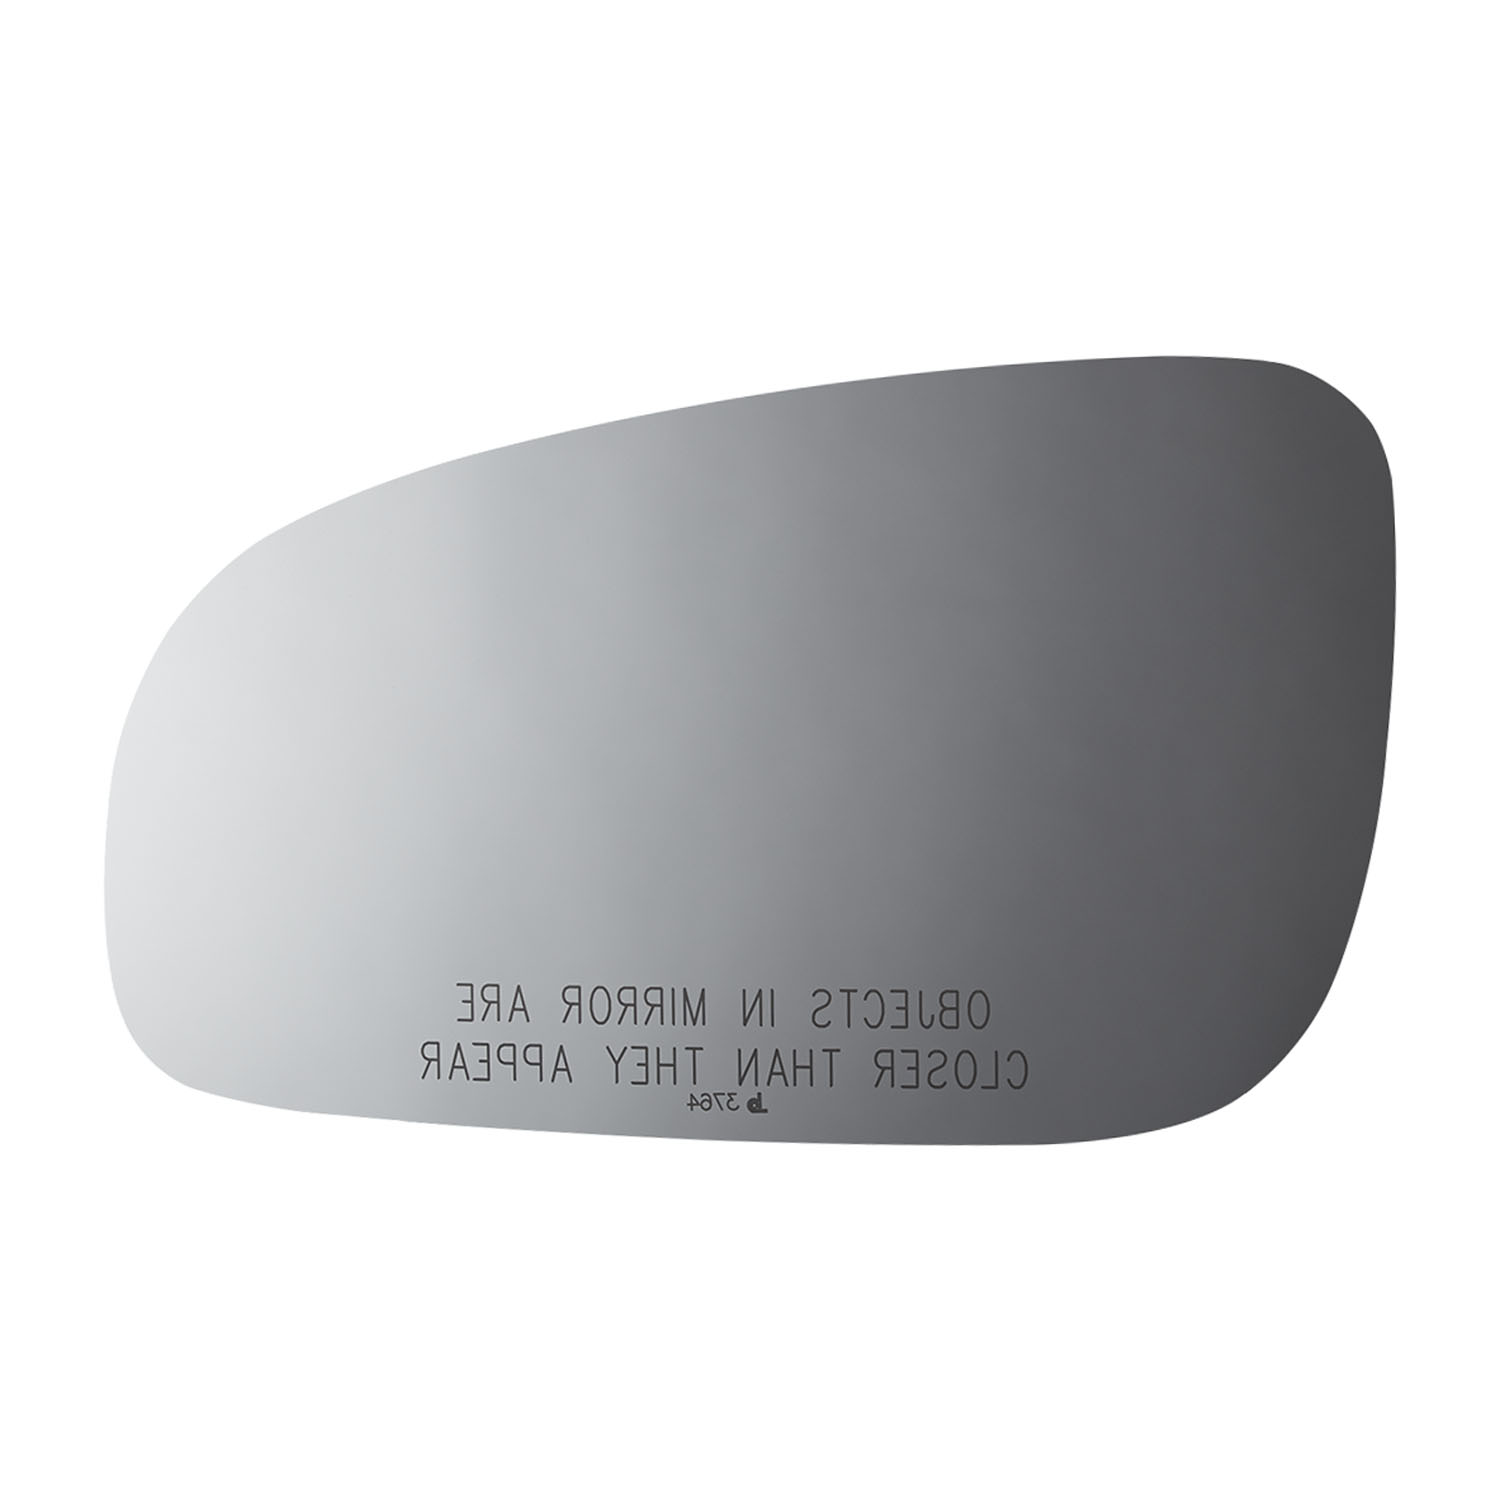 3764 SIDE VIEW MIRROR